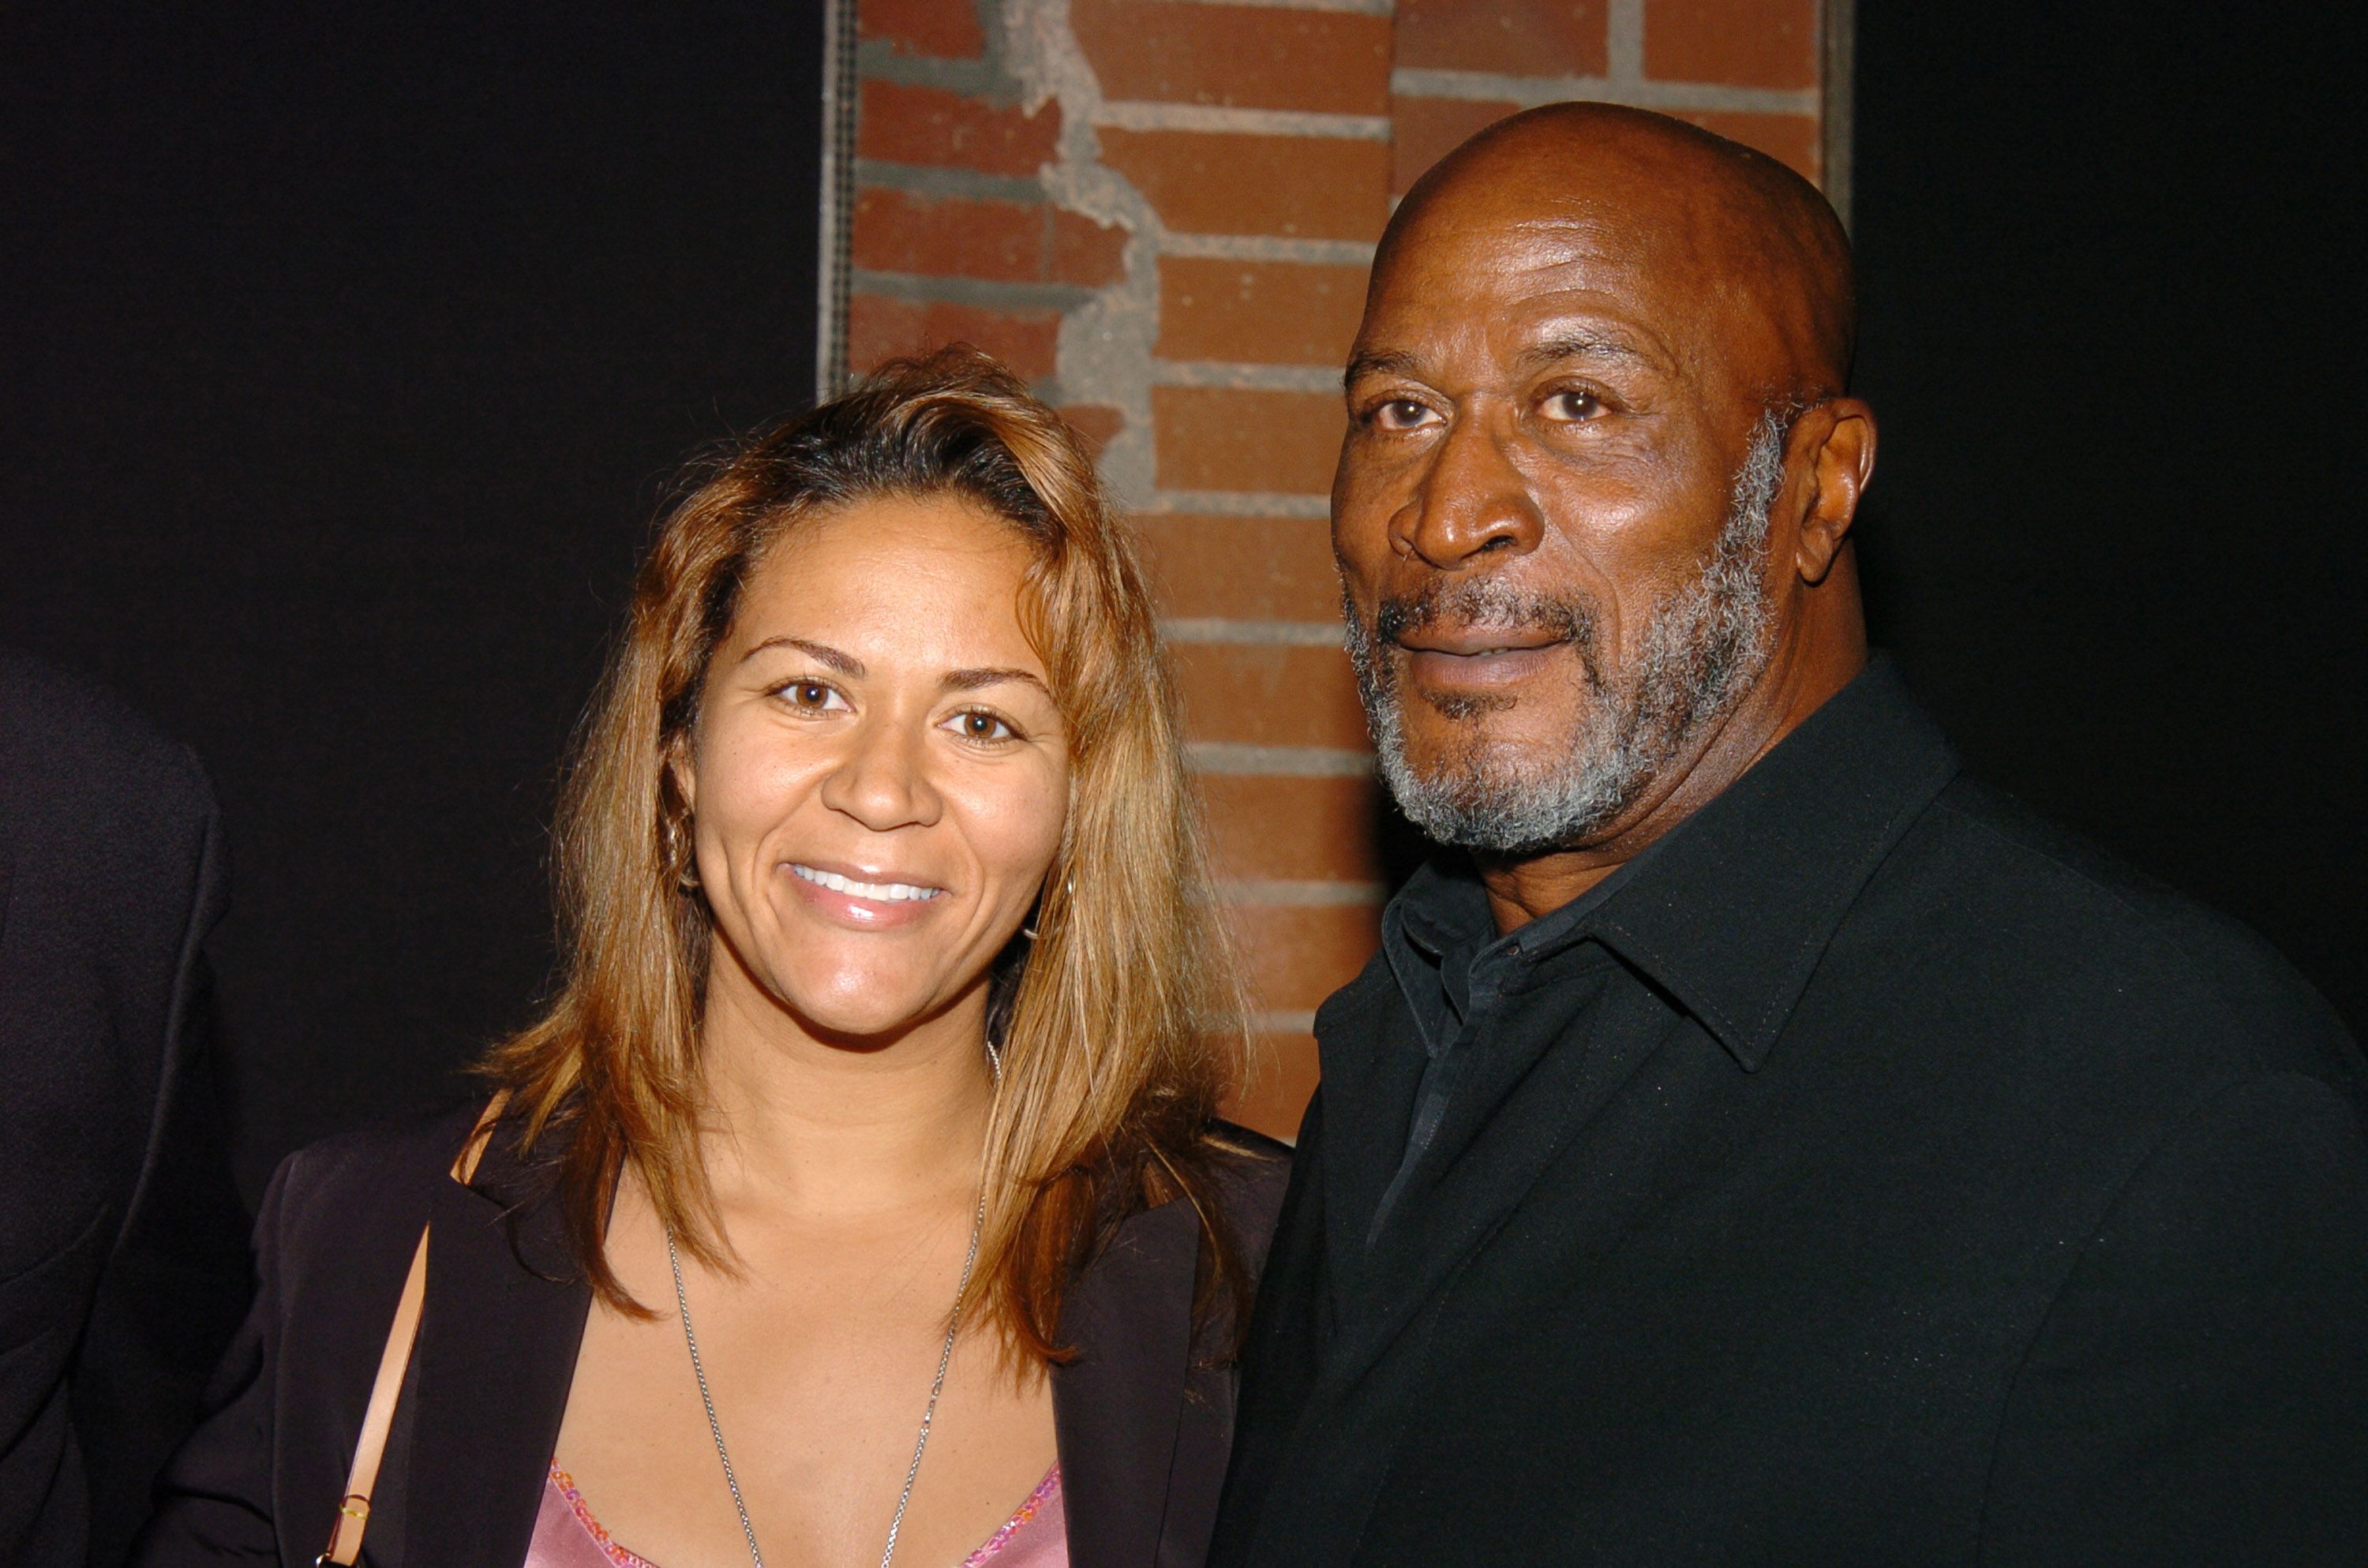 John Amos and daughter Shannon at the third annual "Acts of Love" after-party in Los Angeles on November 08, 2004. | Photo: Getty Images